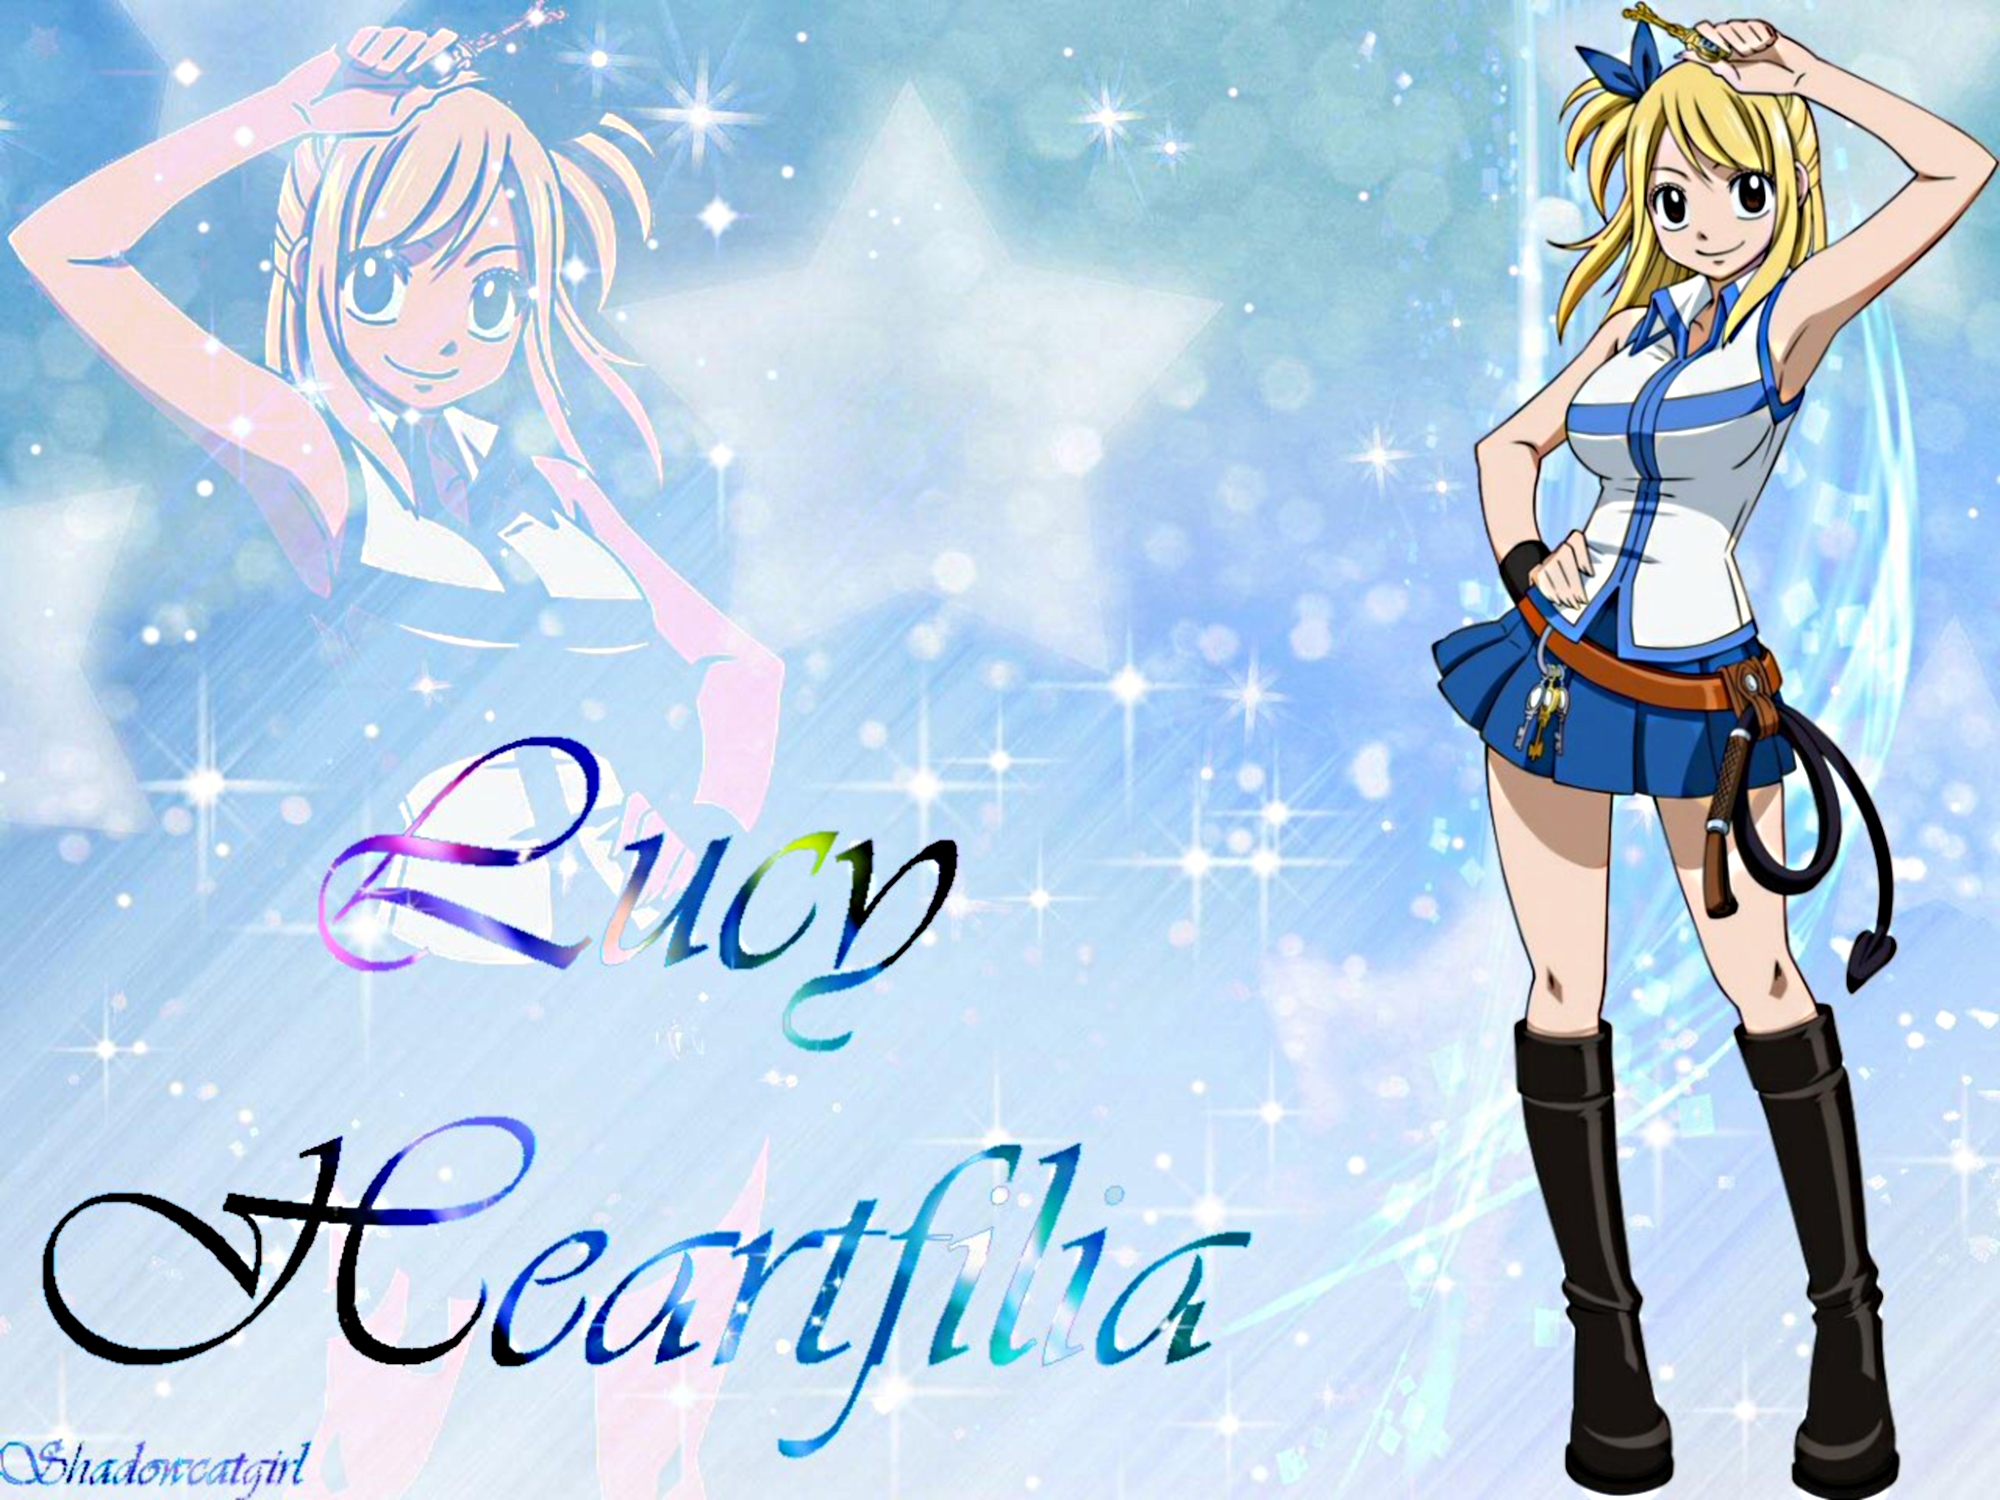 10. Lucy Heartfilia from Fairy Tail - wide 7